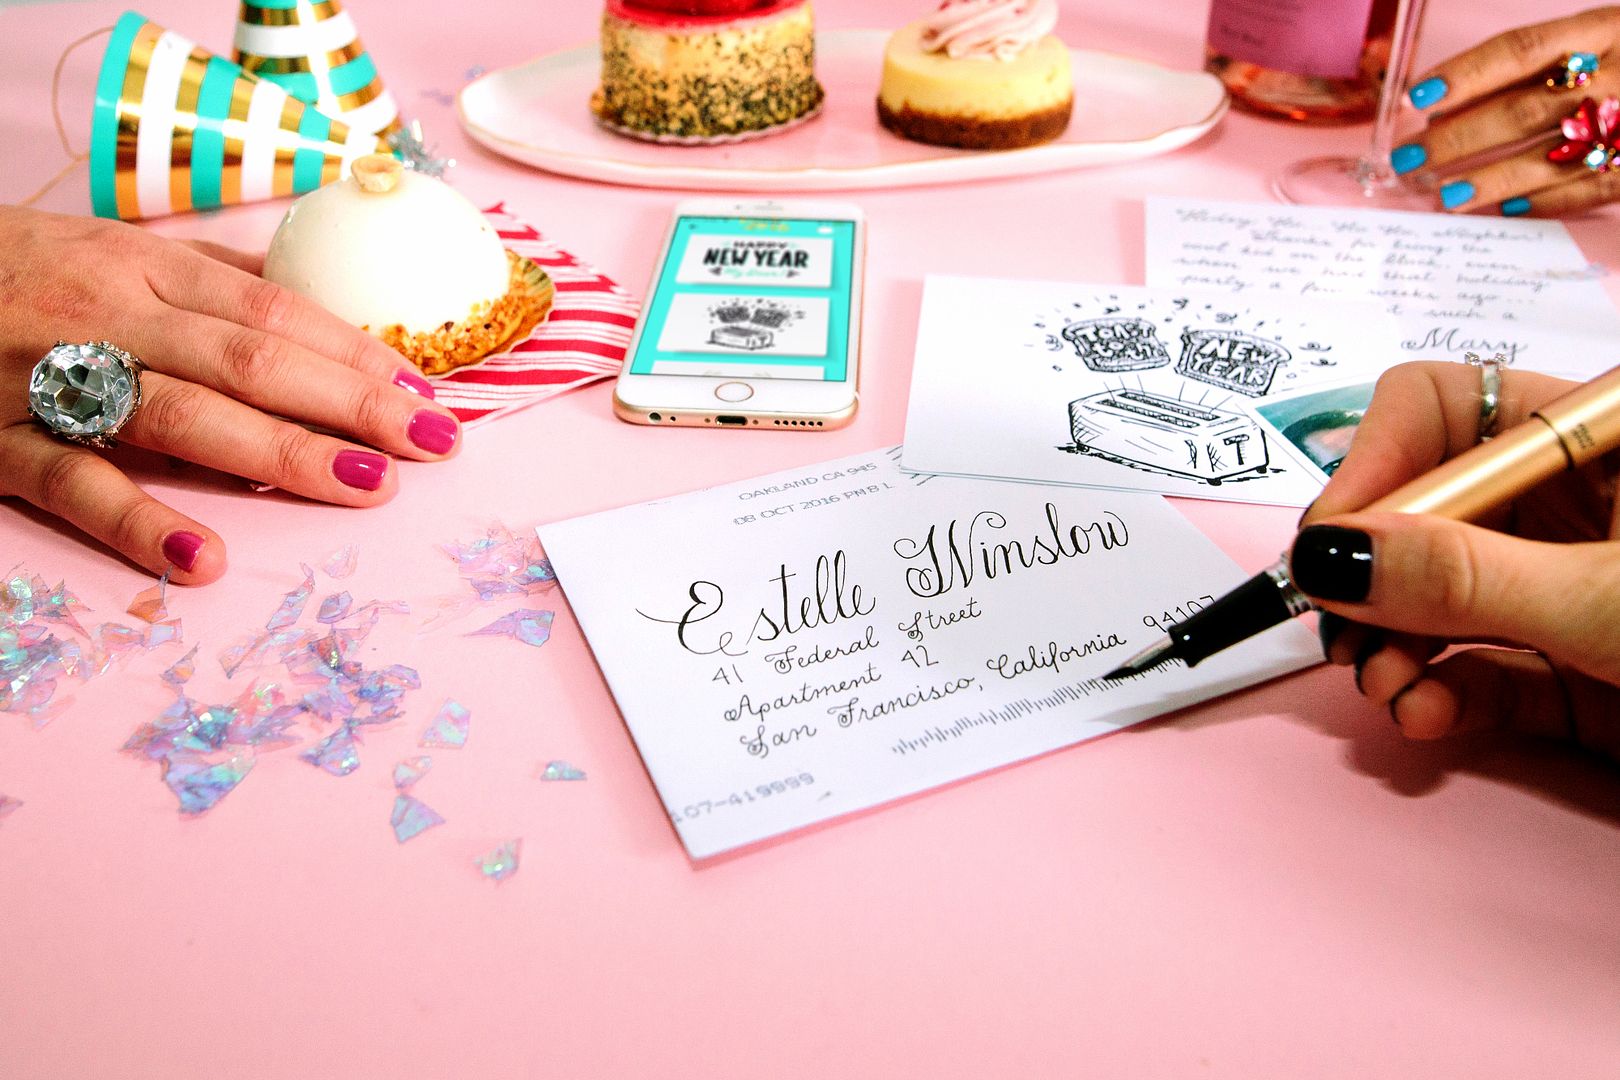 Punk Post can address and write cards affordably to all your friends, in styles from fun to formal